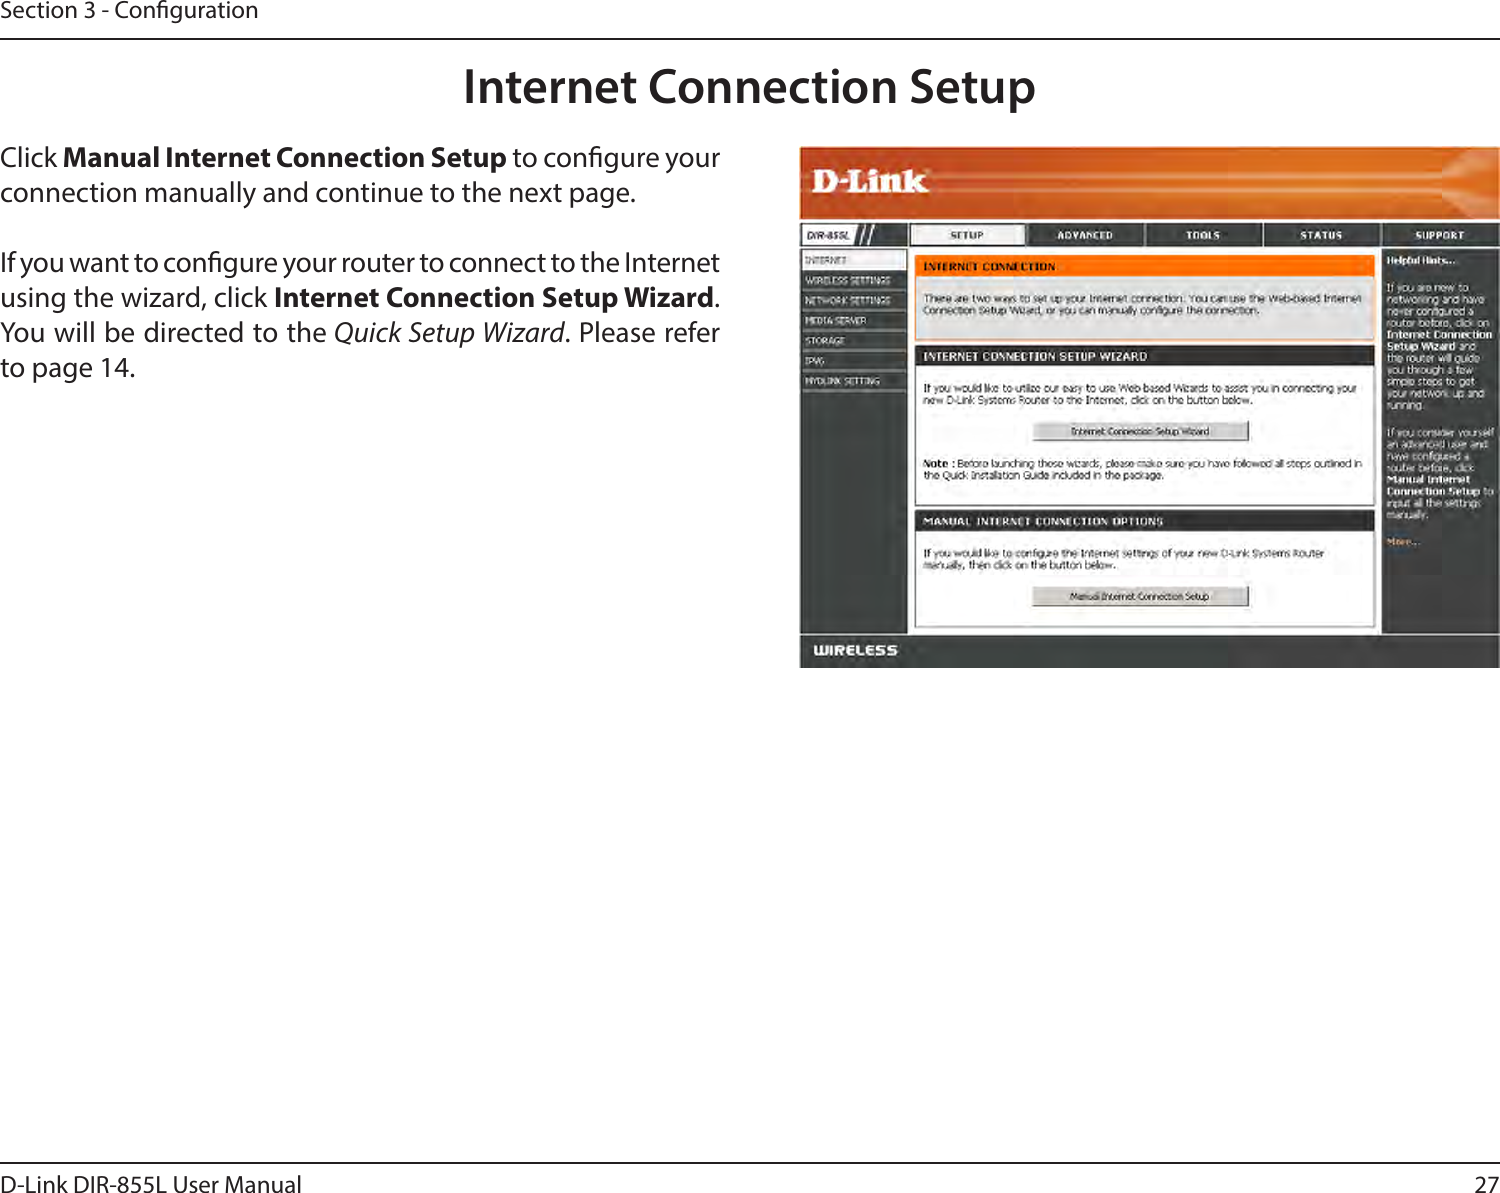 27D-Link DIR-855L User ManualSection 3 - CongurationInternet Connection SetupClick Manual Internet Connection Setup to congure your connection manually and continue to the next page.If you want to congure your router to connect to the Internet using the wizard, click InternetConnectionSetupWizard. You will be directed to the Quick Setup Wizard. Please refer to page 14.